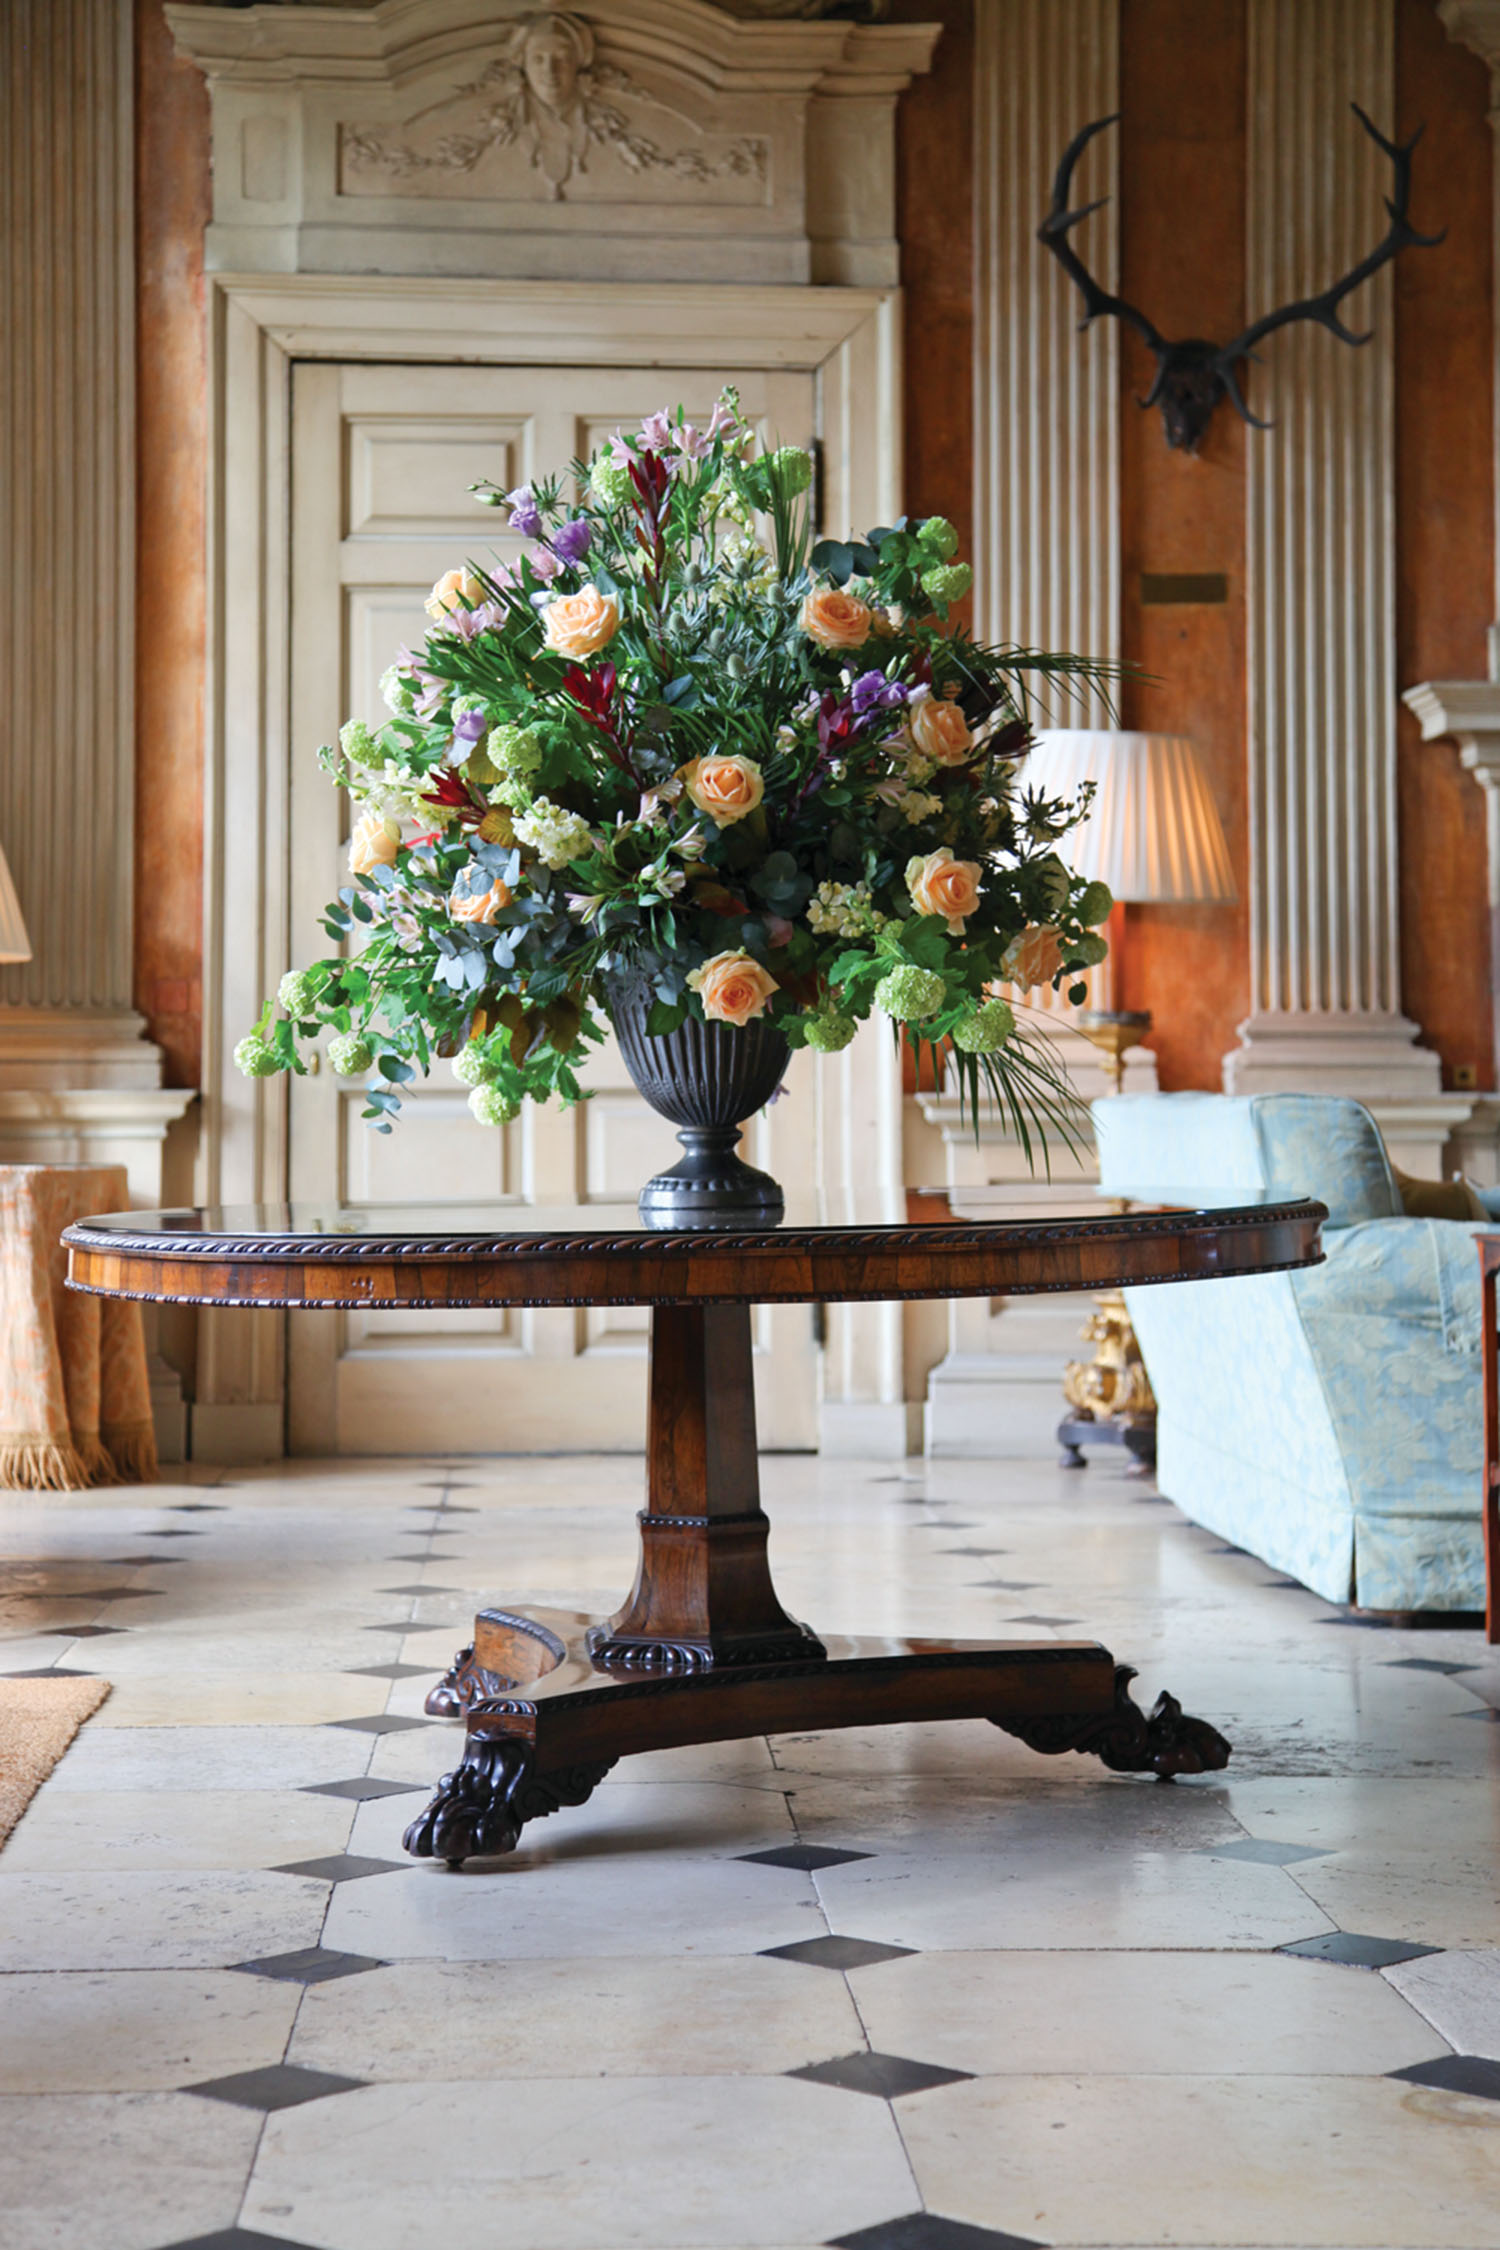 Ditchley Park interiors